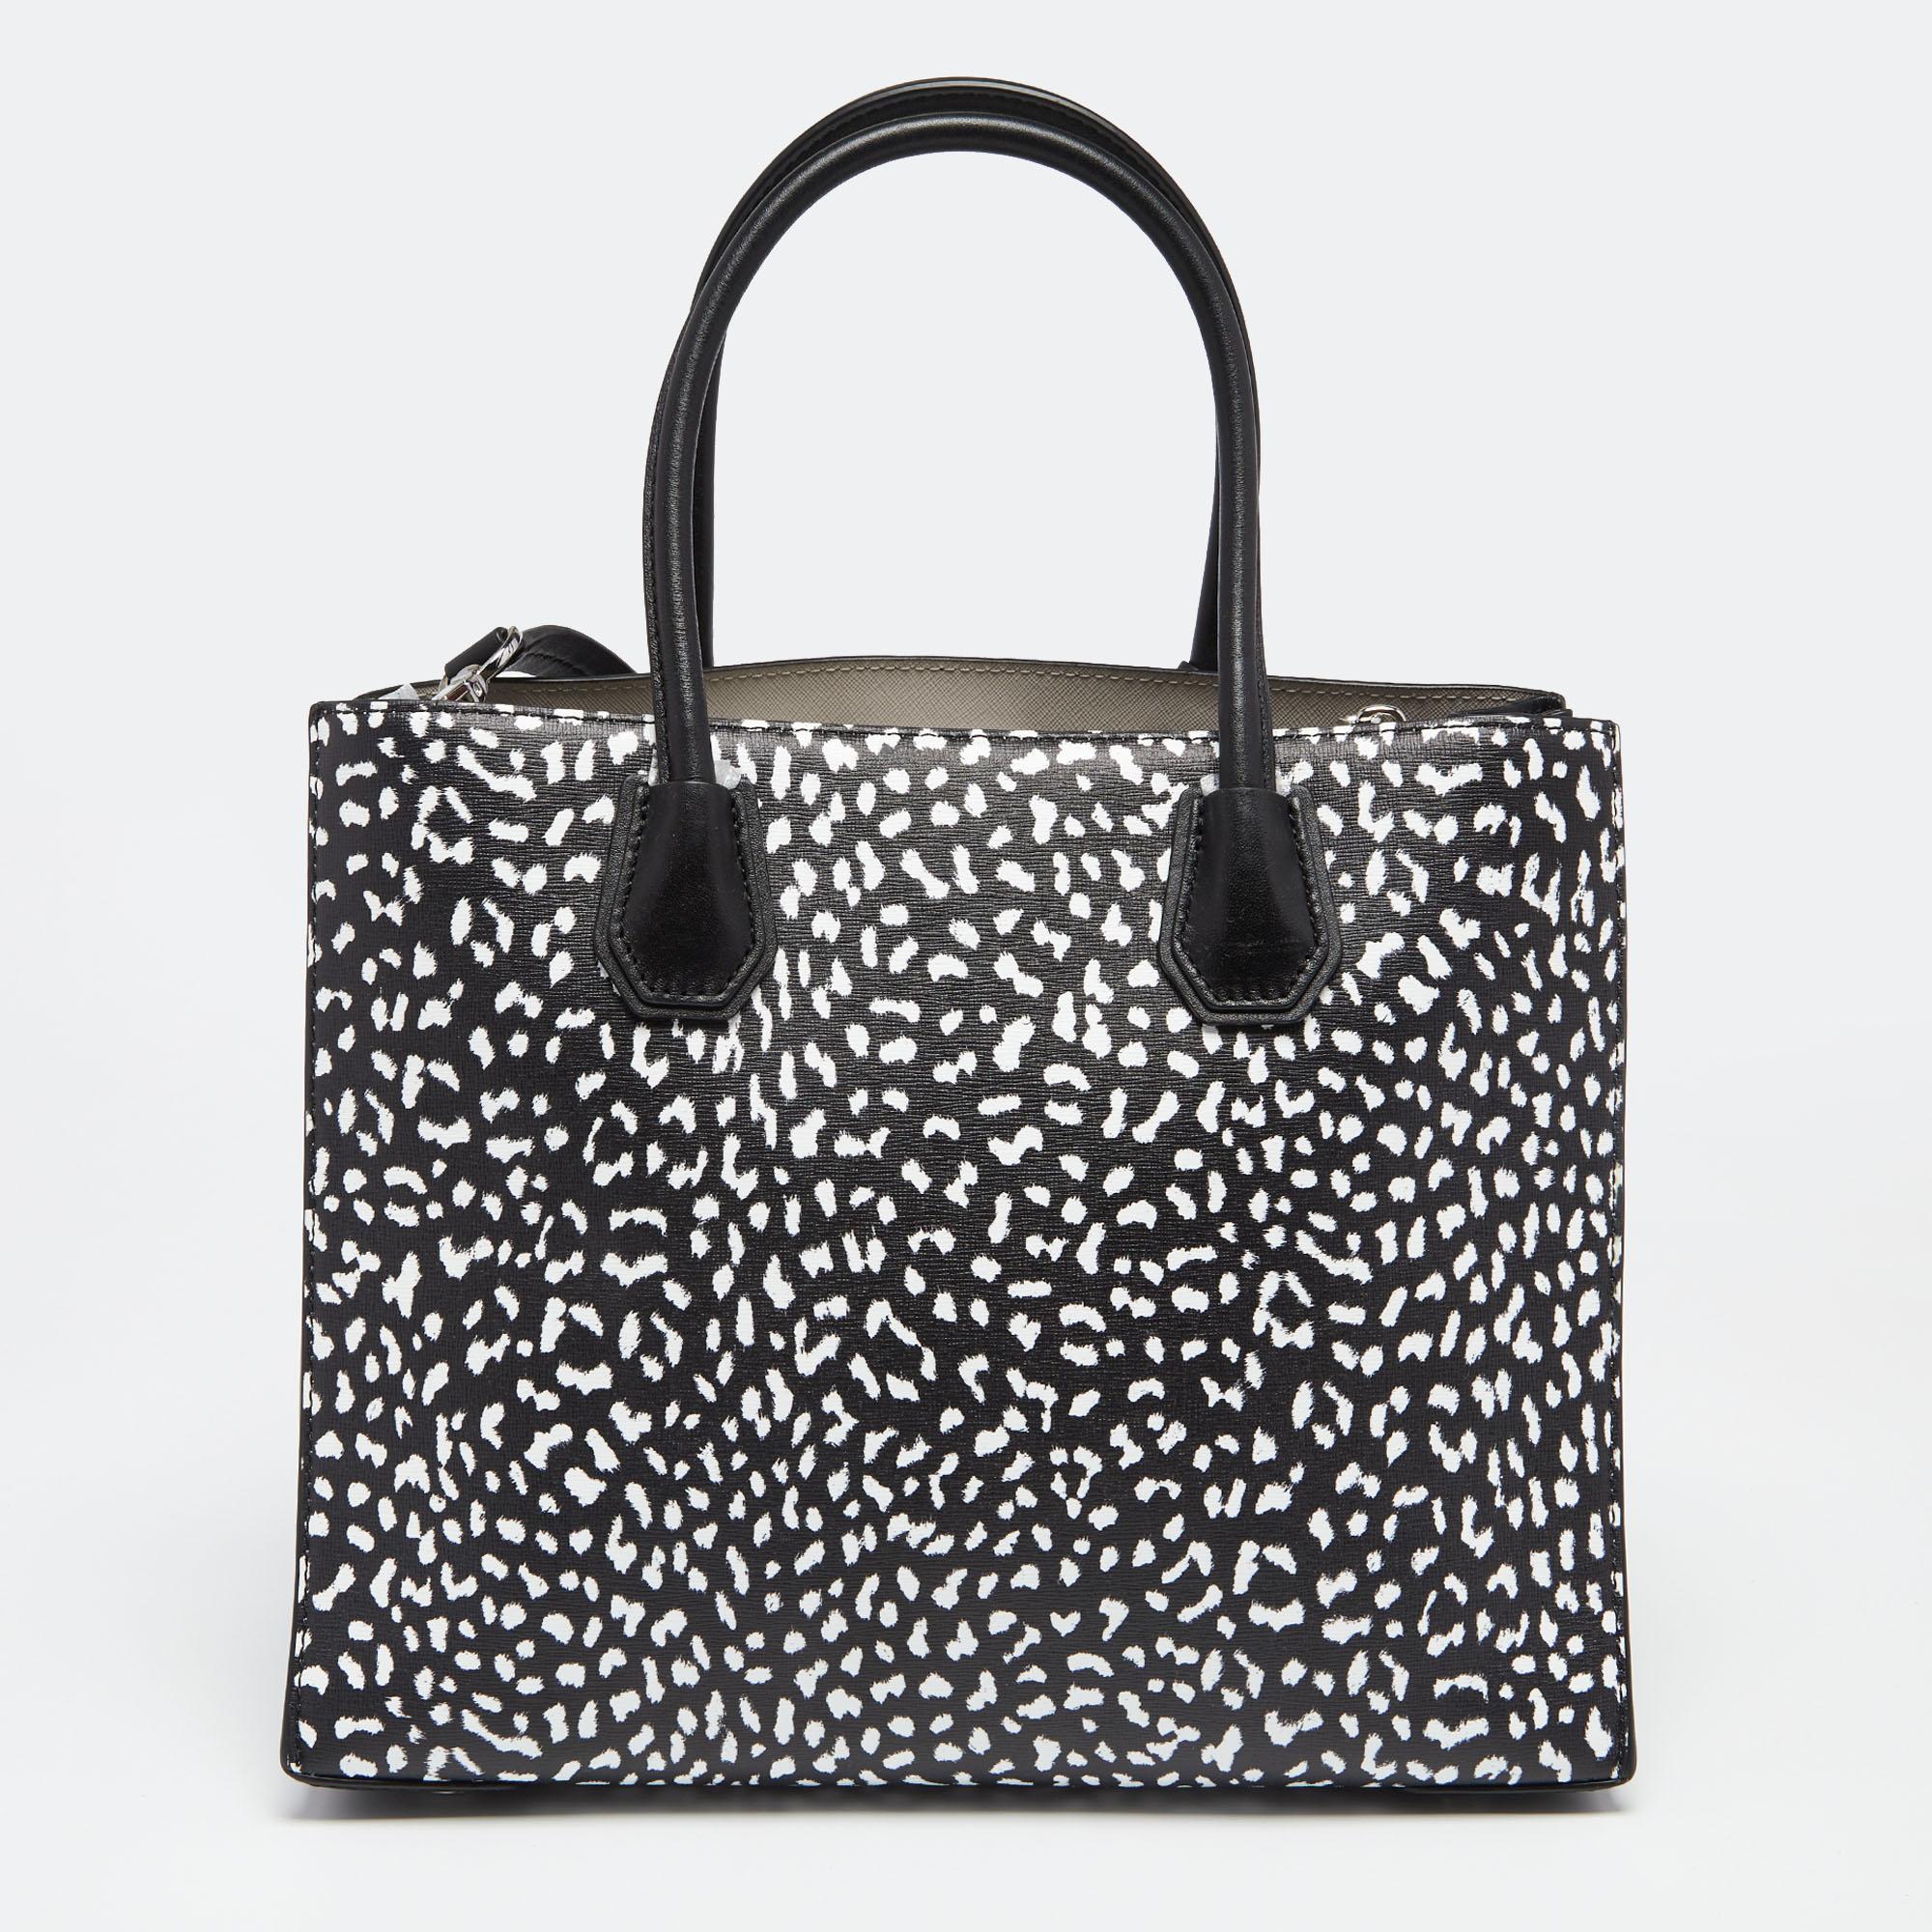 One of the most stunning creations from Michael Kors is this Mercer tote. It is made from black-white leopard-printed leather. It features silver-toned hardware and a leather-fabric interior. The structured silhouette of the tote is supported by